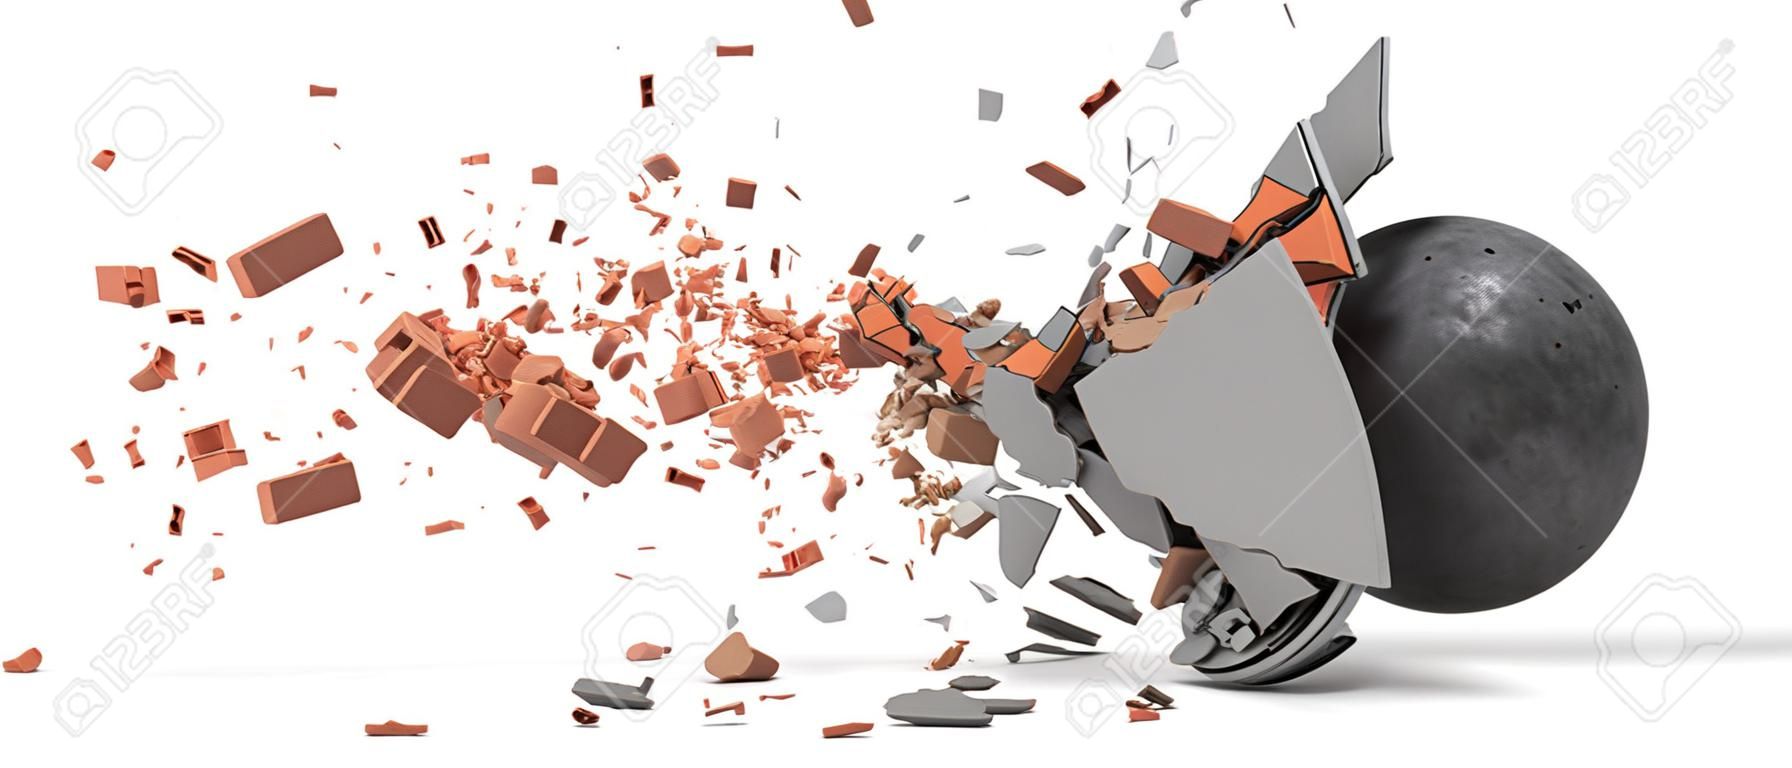 3d rendering of a large swinging wrecking ball crashing at a brick wall with pieces from the wall flying away in side view.